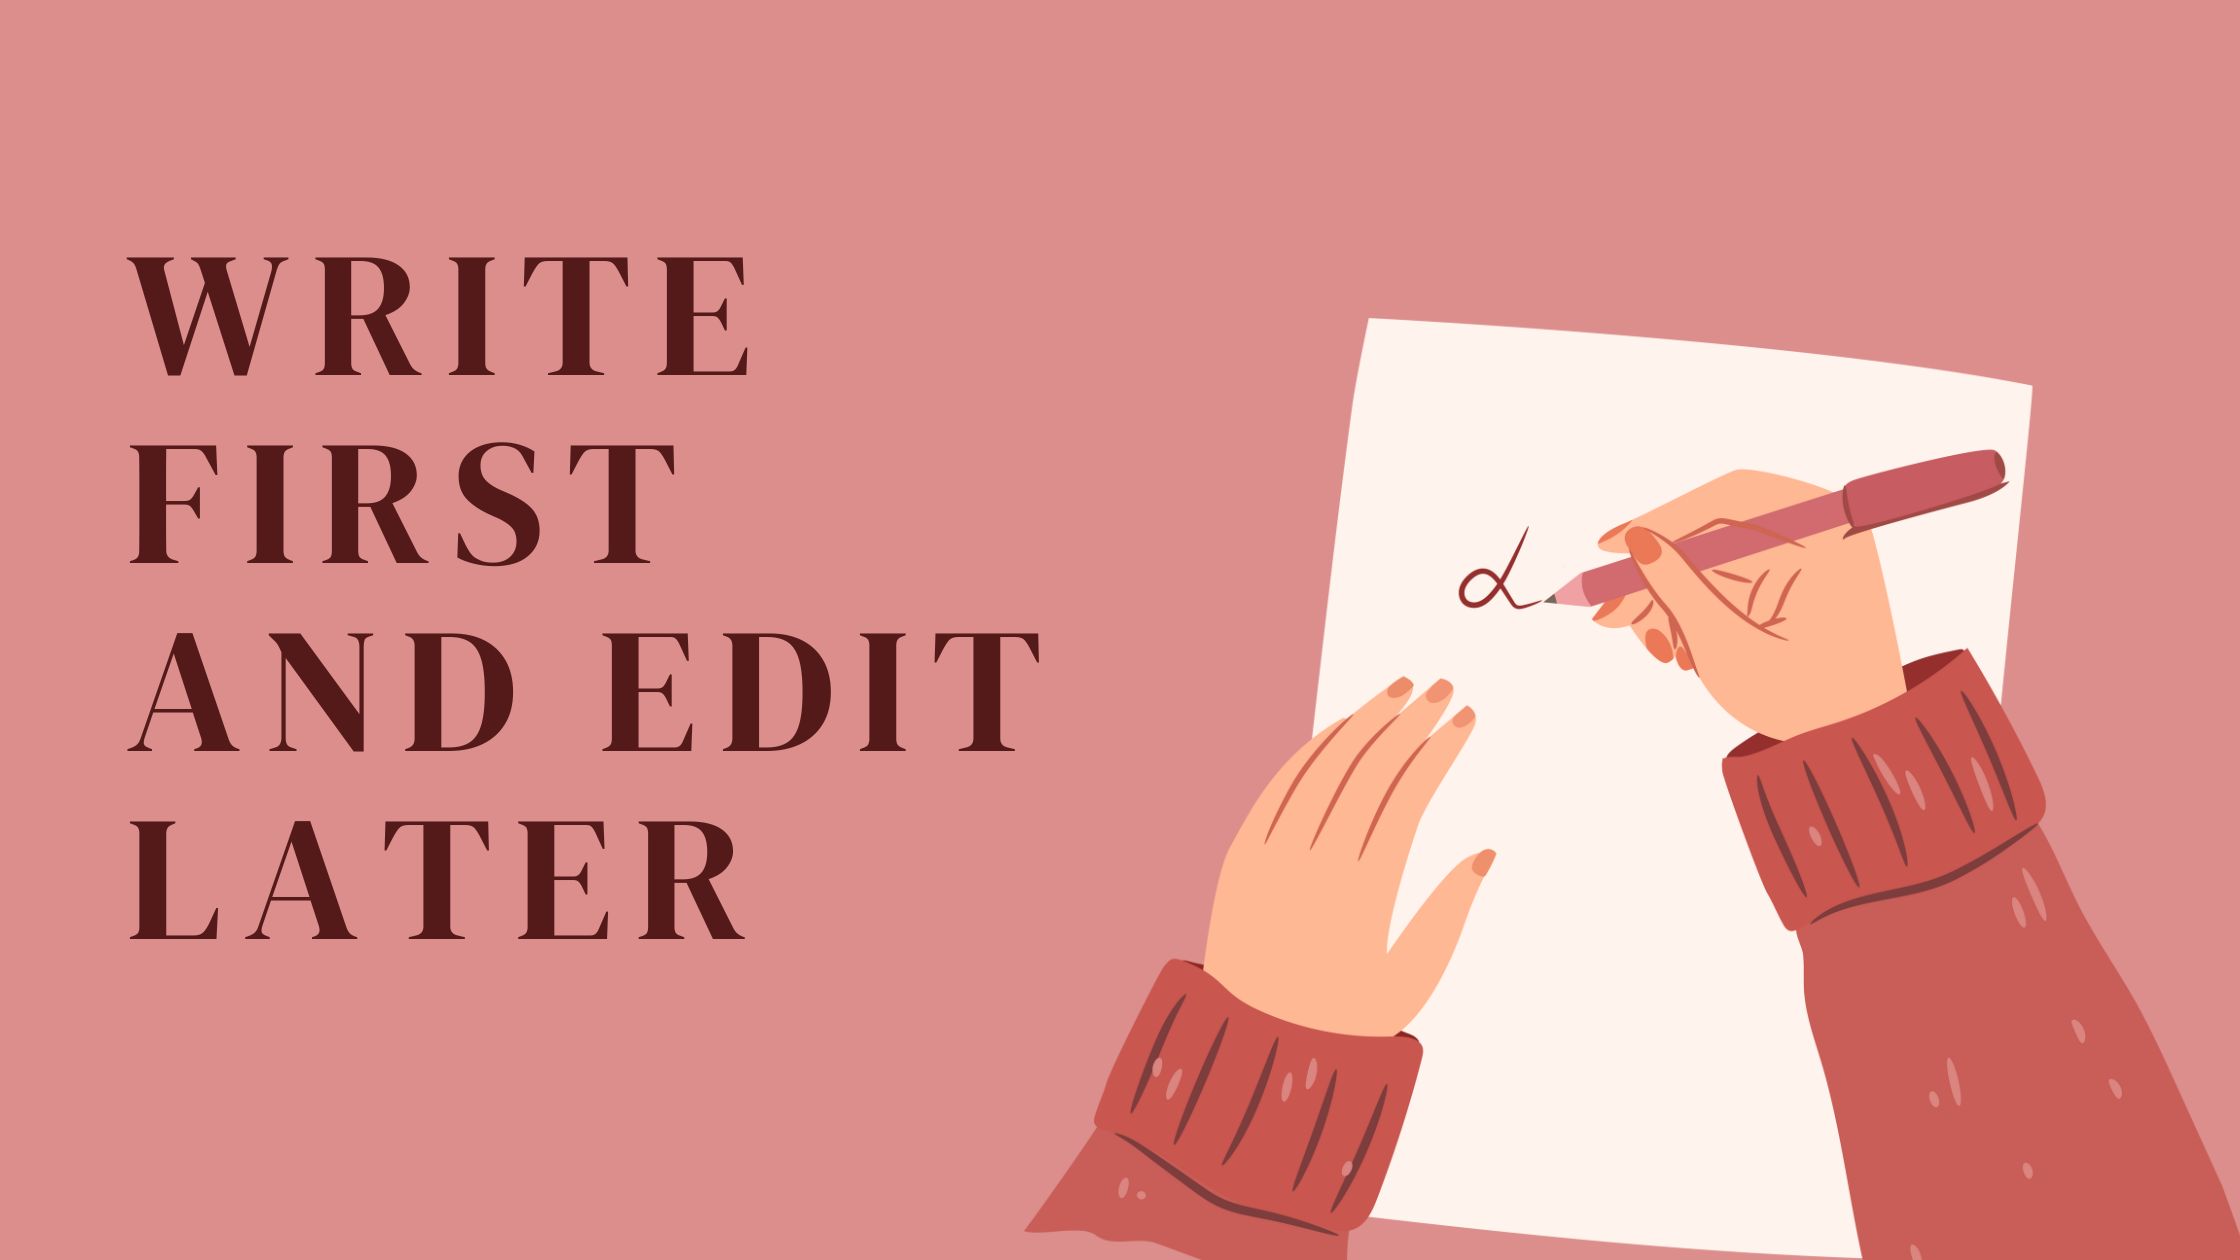 Write first and edit later